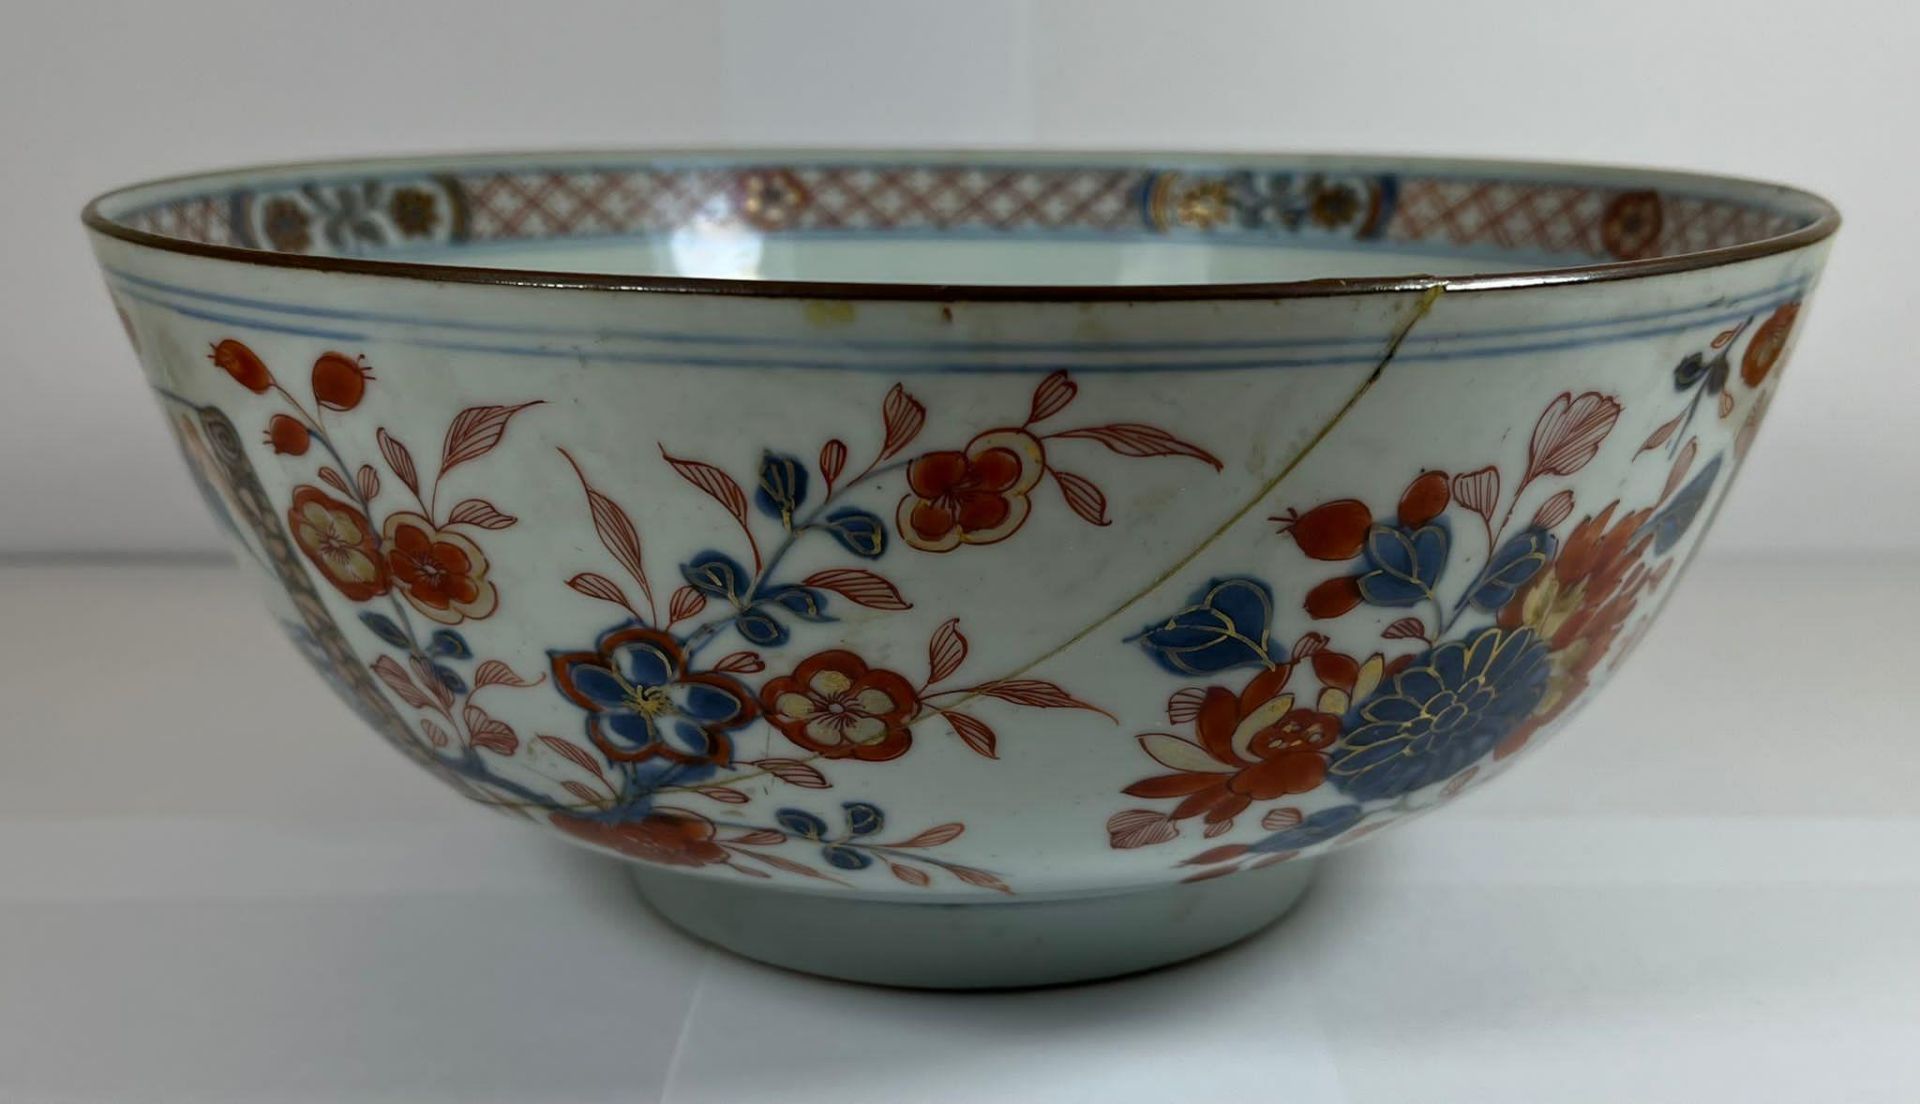 AN 18TH CENTURY CHINESE EXPORT PORCELAIN FRUIT BOWL WITH FLORAL DESIGN, DIAMETER 23CM, HEIGHT 11CM - Image 5 of 6